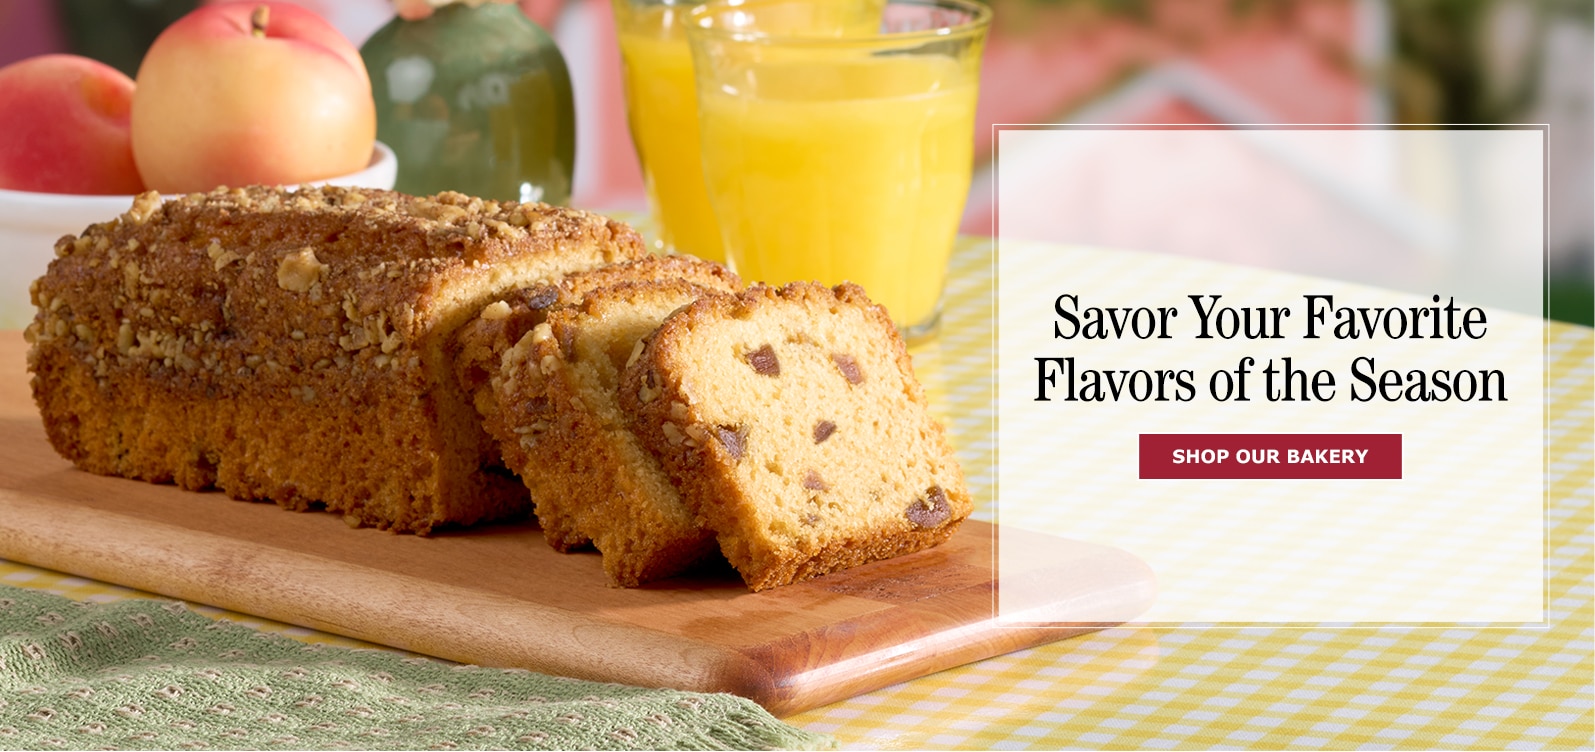 Savor Your Favorite Flavors of the Season. Shop Our Bakery